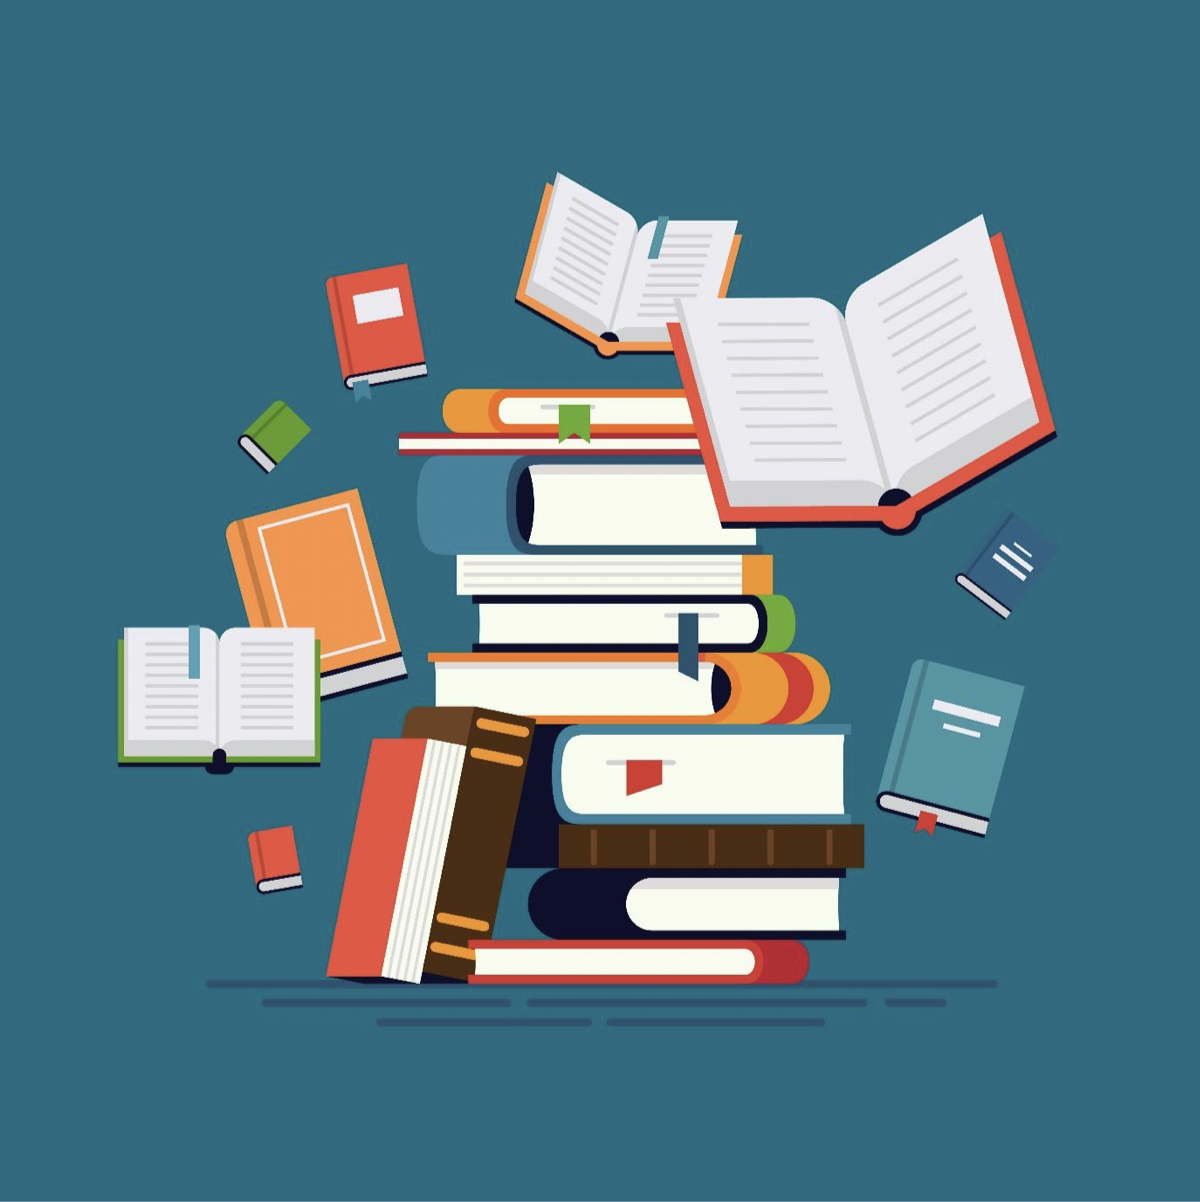 Best Books for JEE Mains